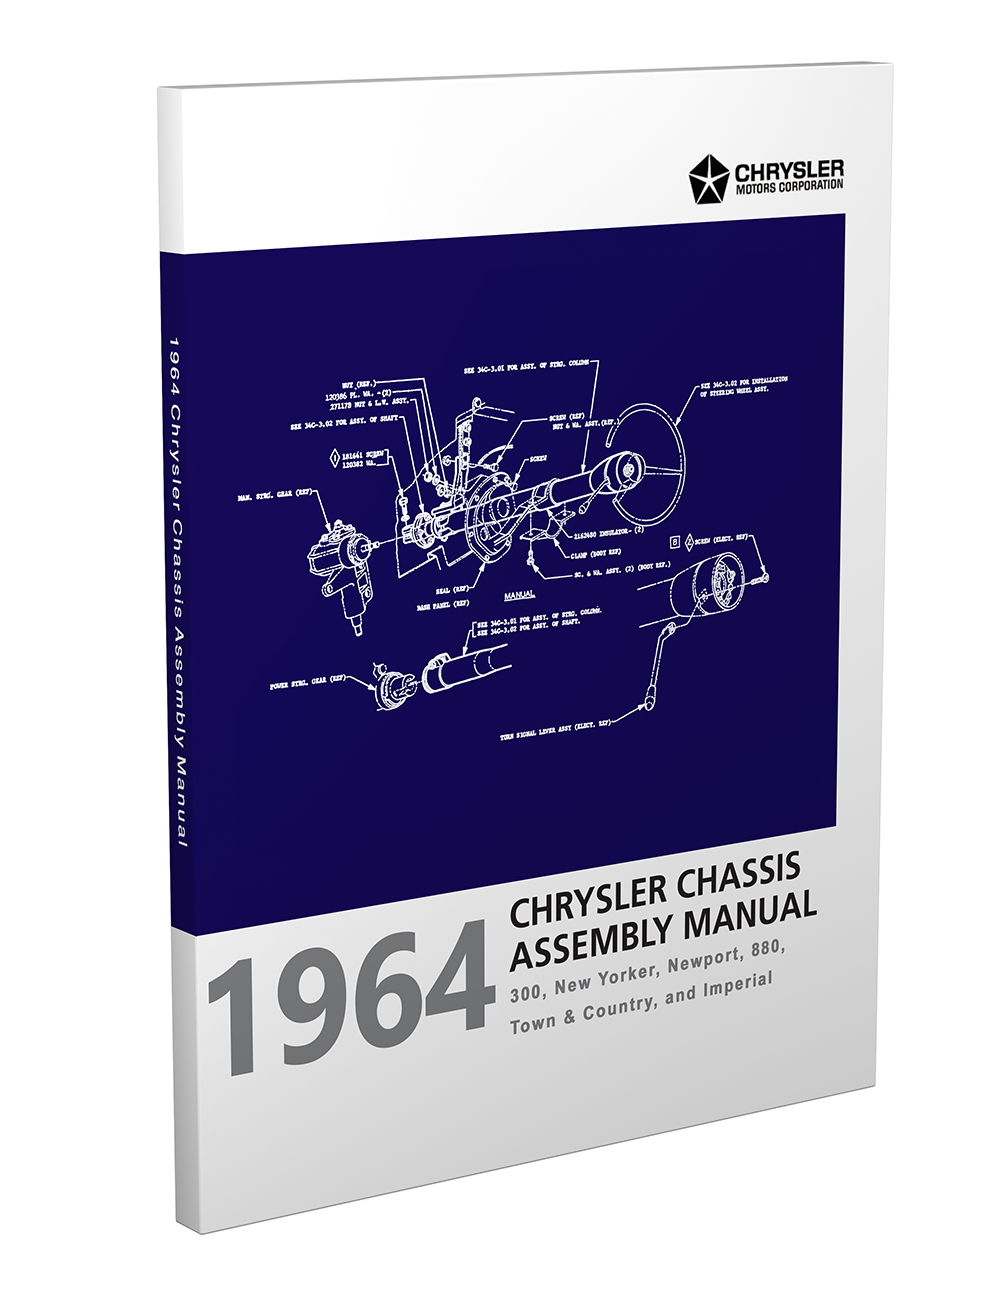 1964 Dodge 880 and Chrysler Chassis Assembly Manual Reprint 